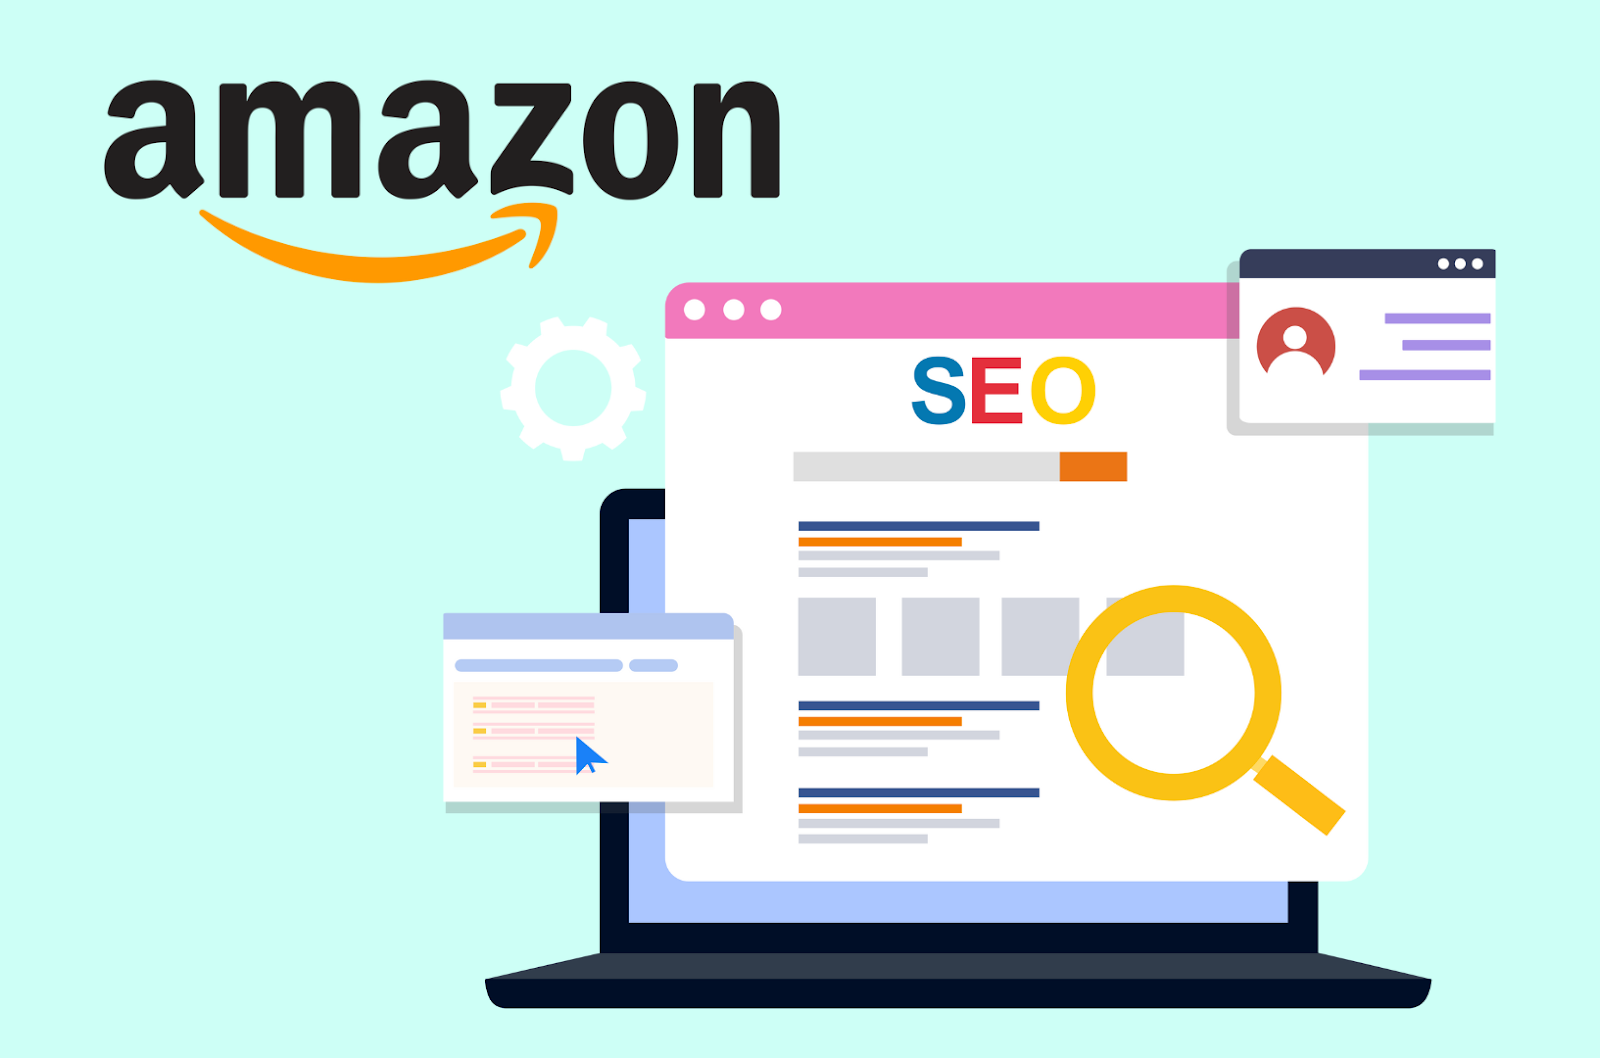 Amazon SEO enhancestheir visibility and rankings in the platform's search results.